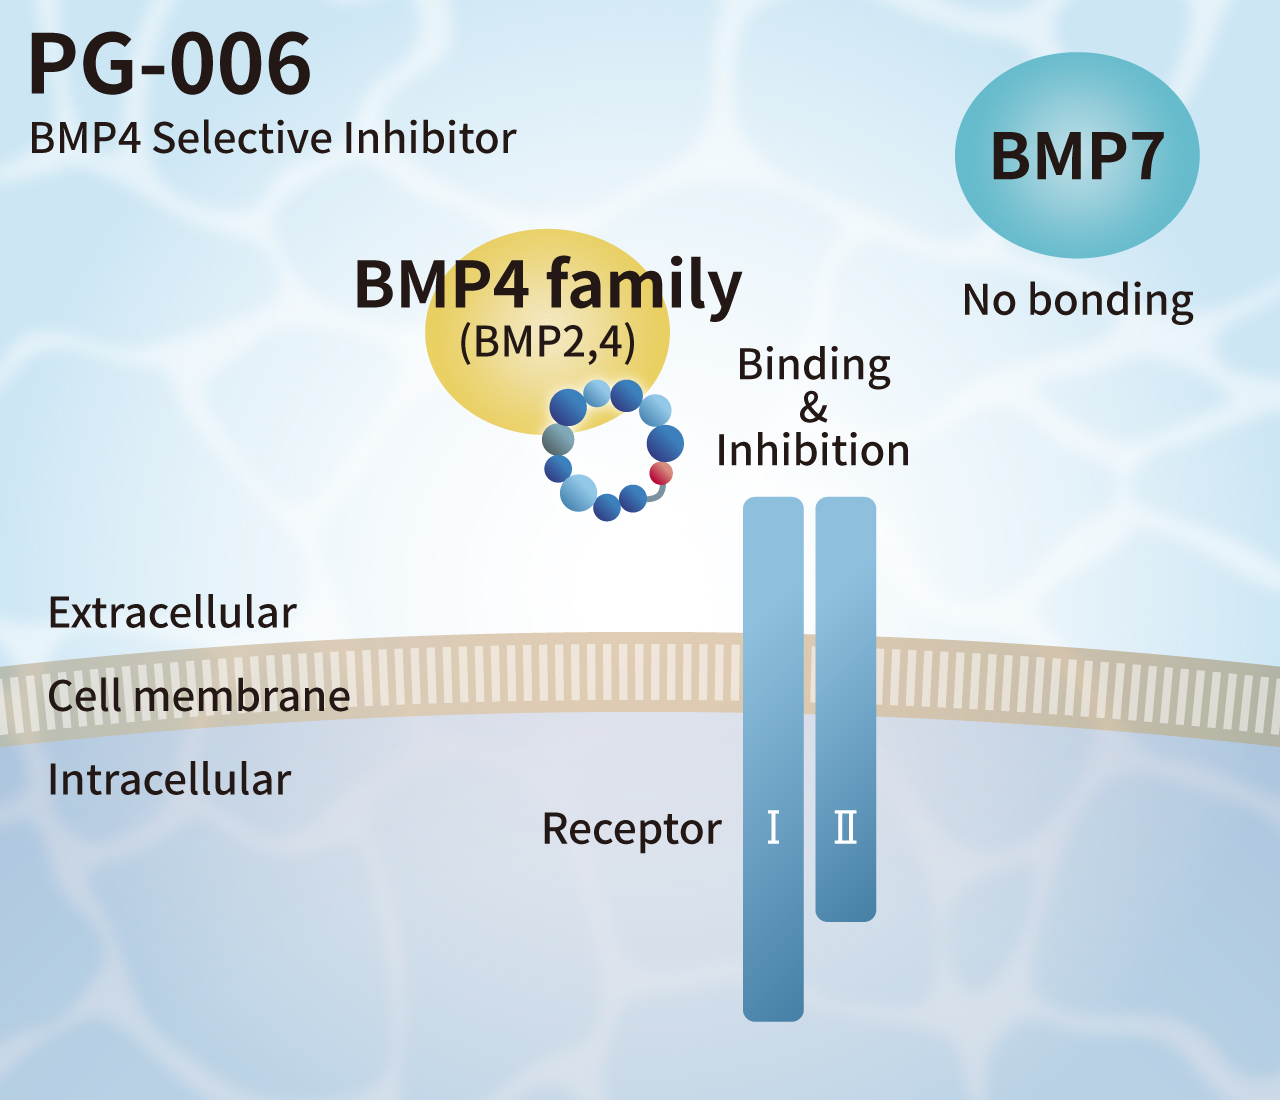 BMP4 Selective Inhibitor